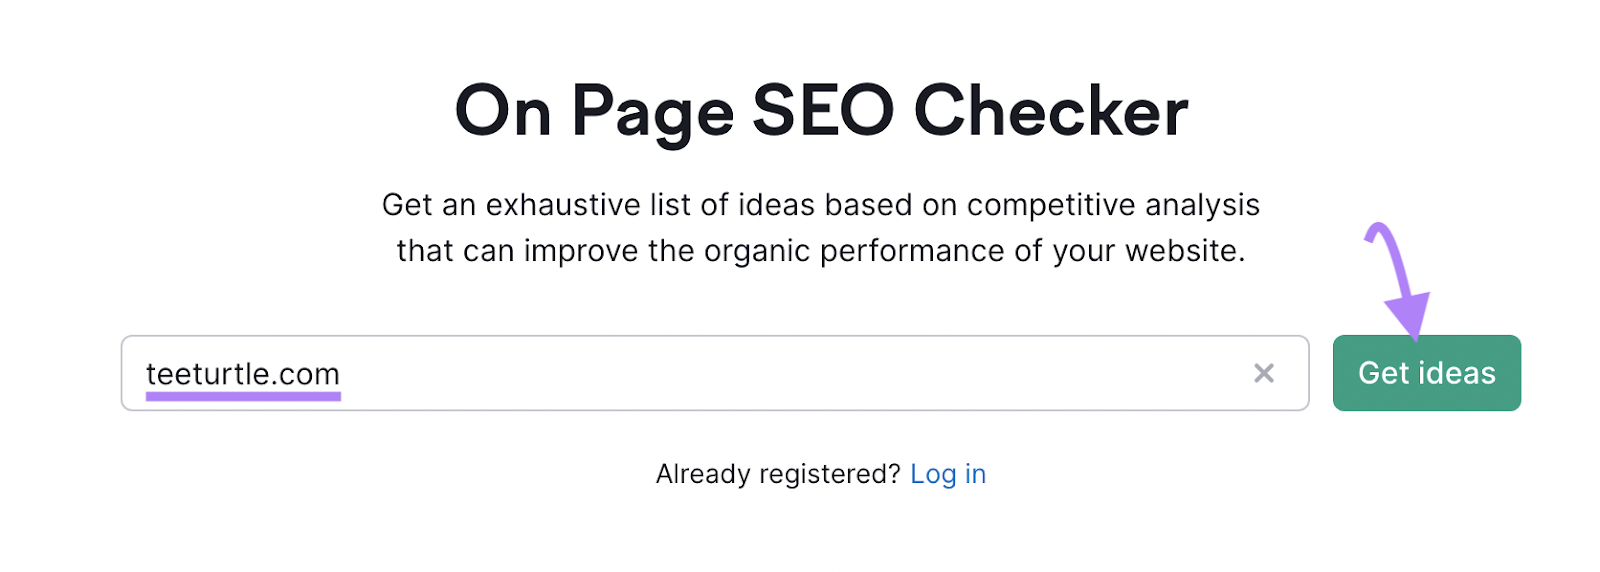 "teeturtle.com" entered into On Page SEO Checker search bar